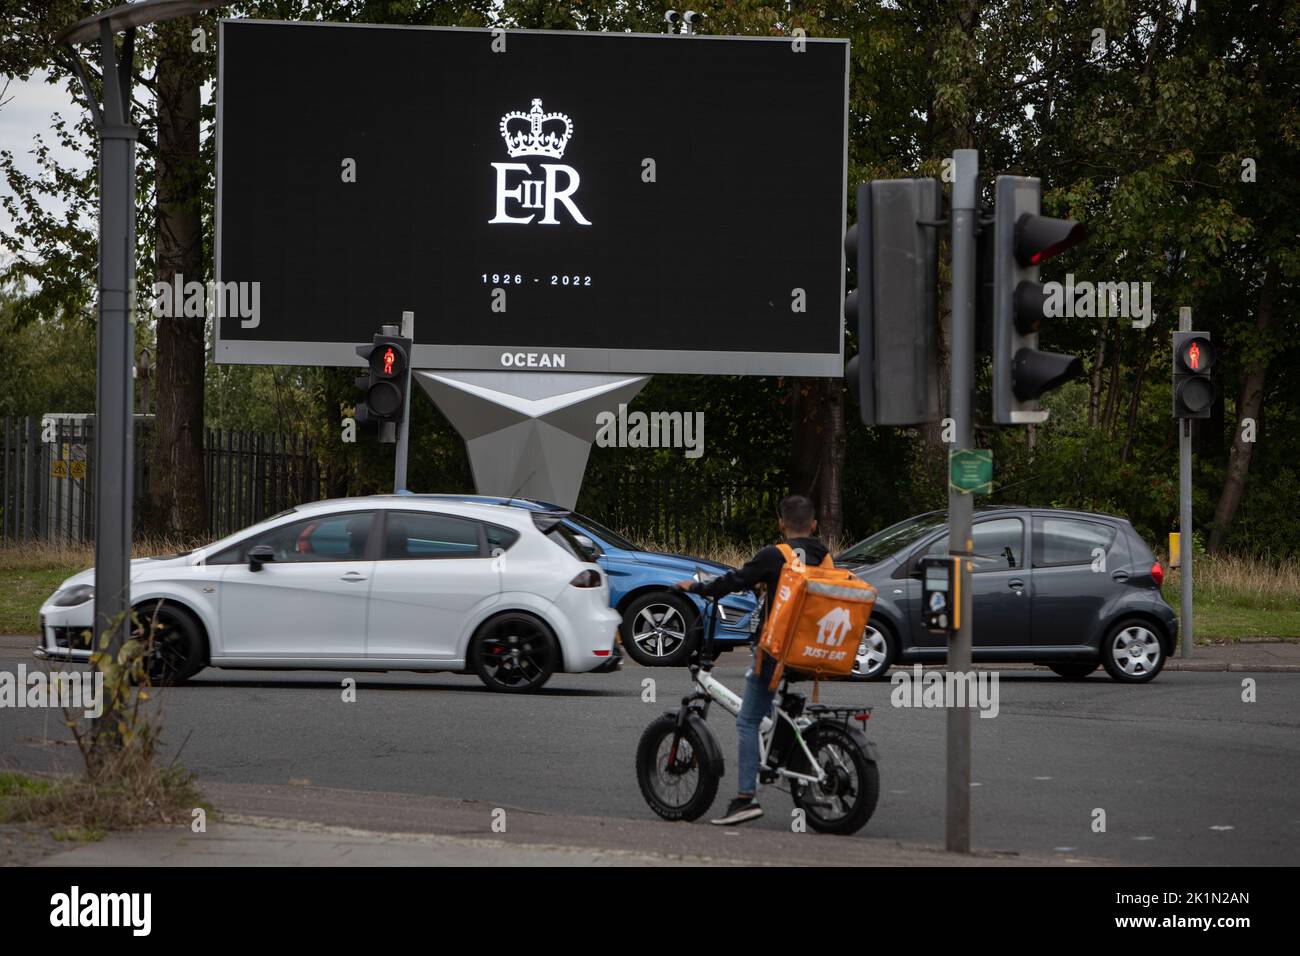 Glasgow, Scotland, 19 September 2022. A digital billboard displays the Royal insignia as a mark of respect to Her Majesty Queen Elizabeth II, who died on 8th September, on the day of her funeral, in Glasgow, Scotland, 19 September 2022. Photo credit: Jeremy Sutton-Hibbert/Alamy Live News. Stock Photo